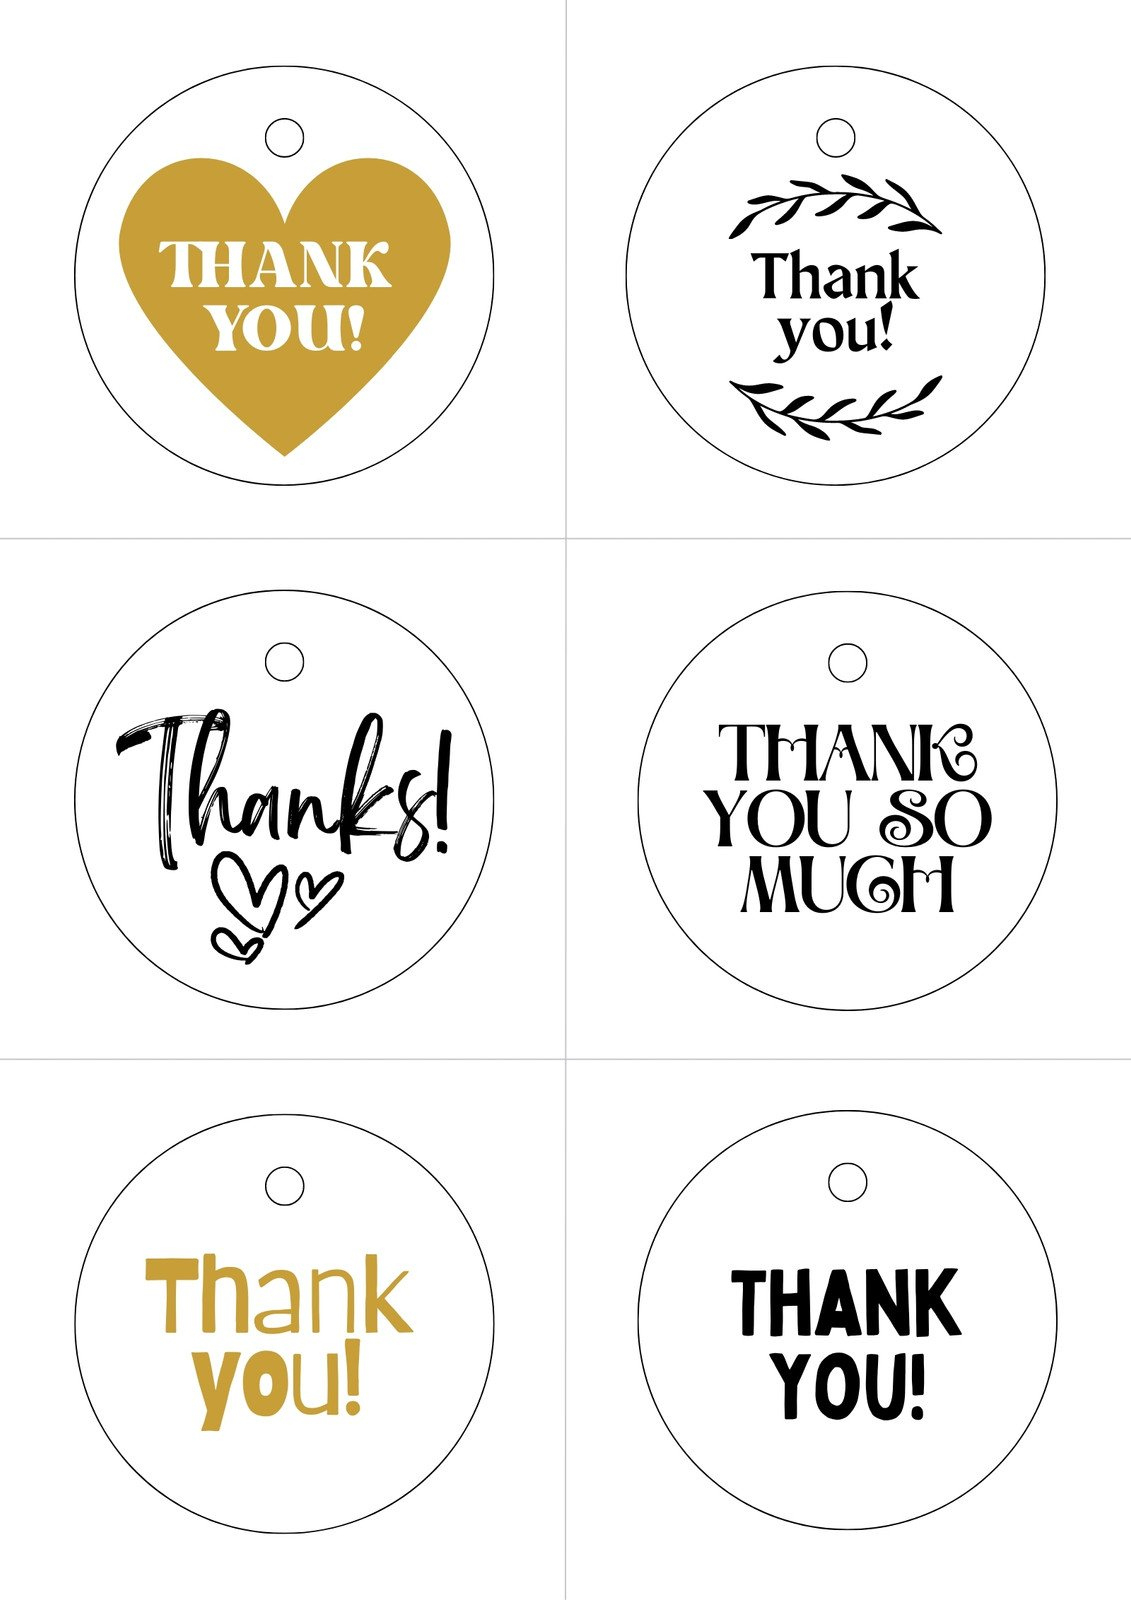 Free, Printable And Customizable Gift Tag Templates | Canva pertaining to Free Printable Thank You Tags